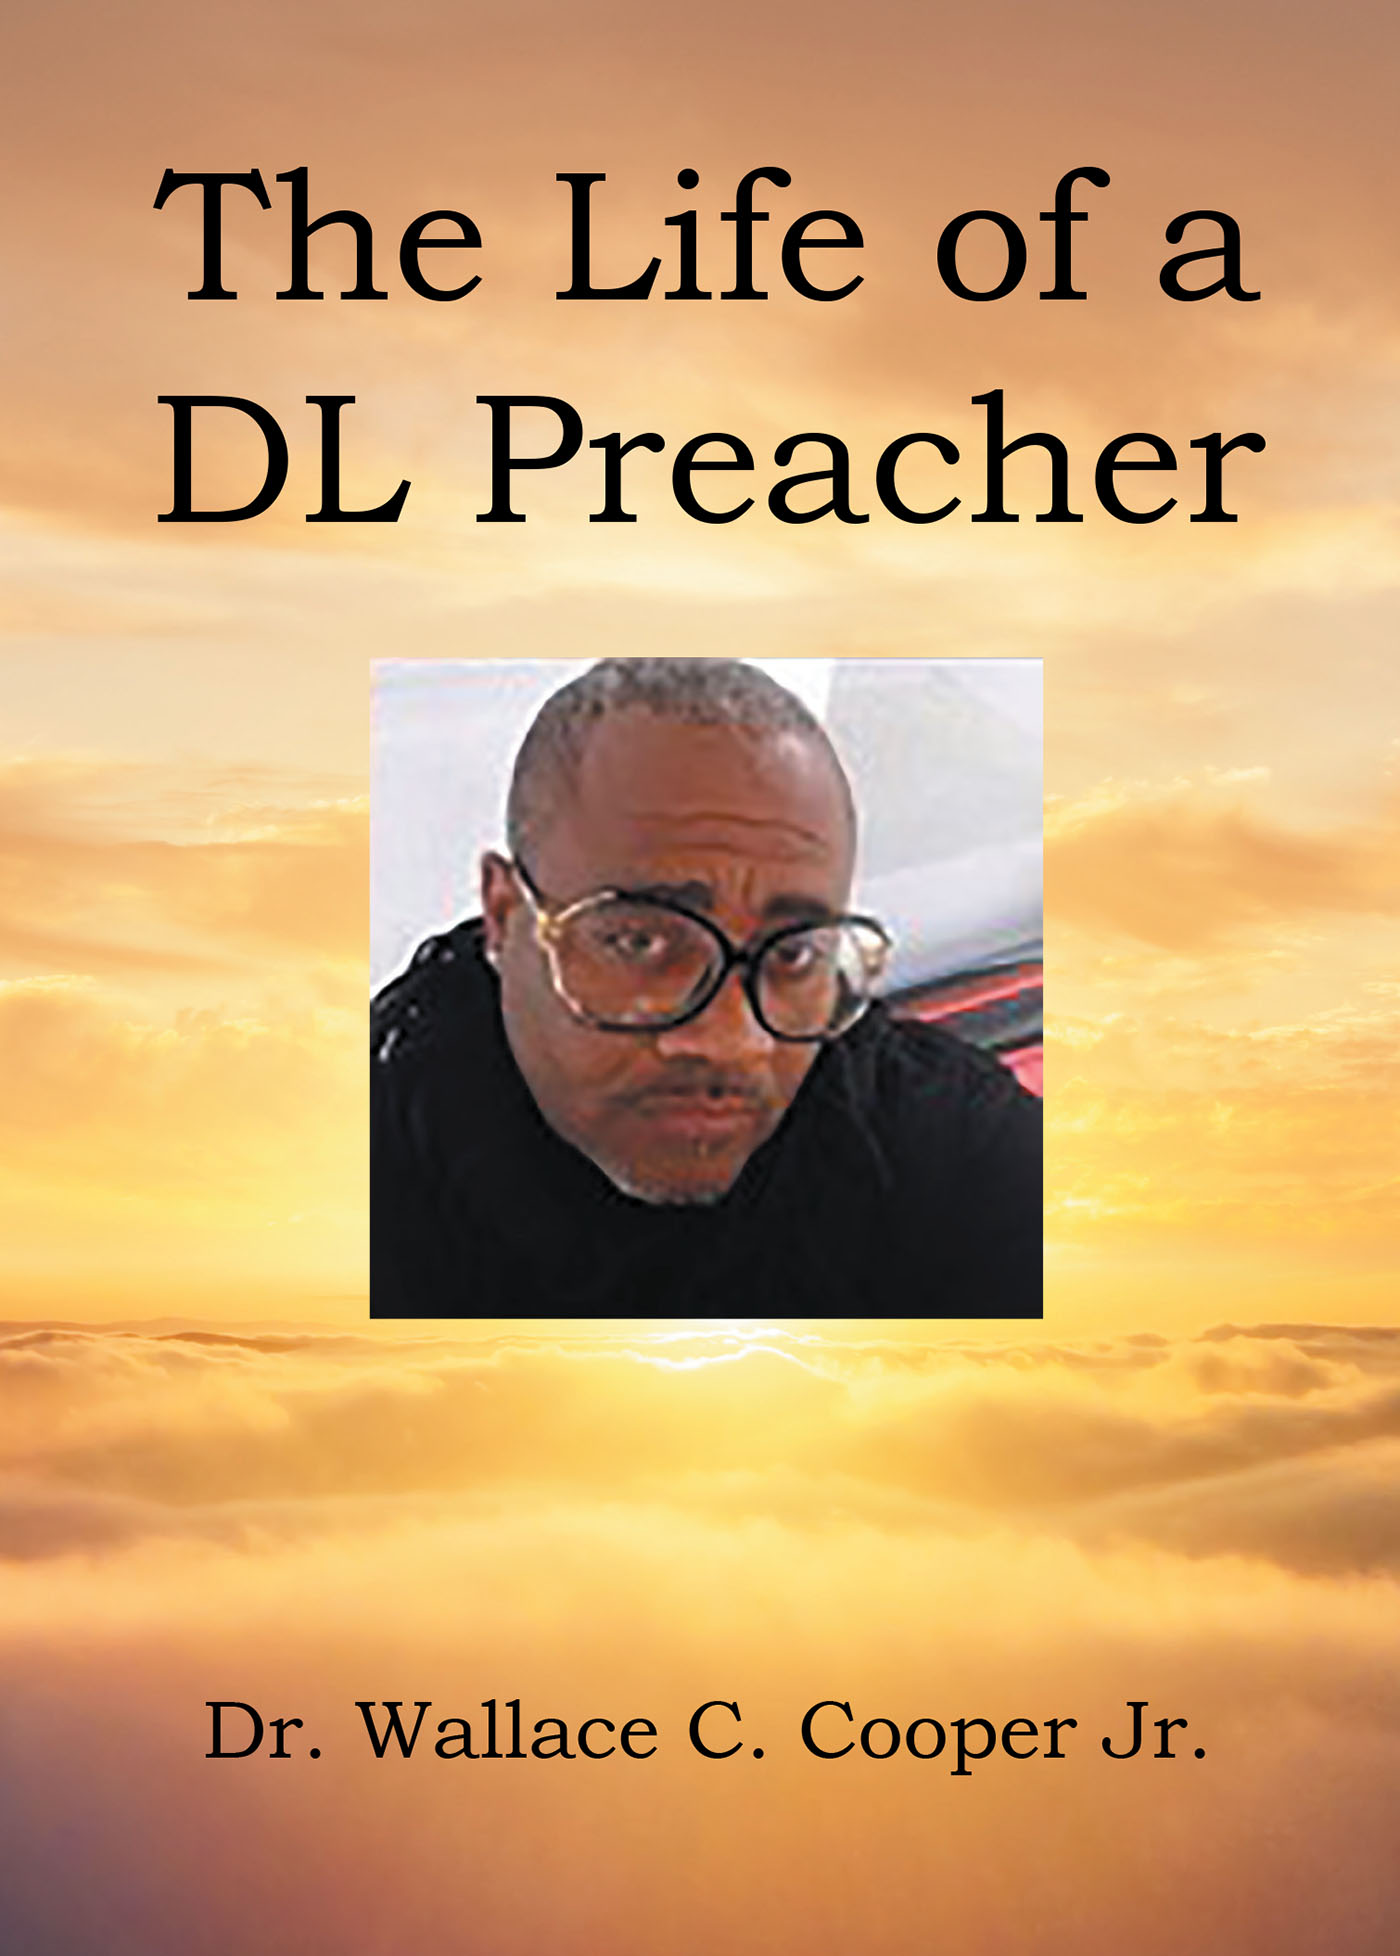 The Life of a DL Preacher Cover Image